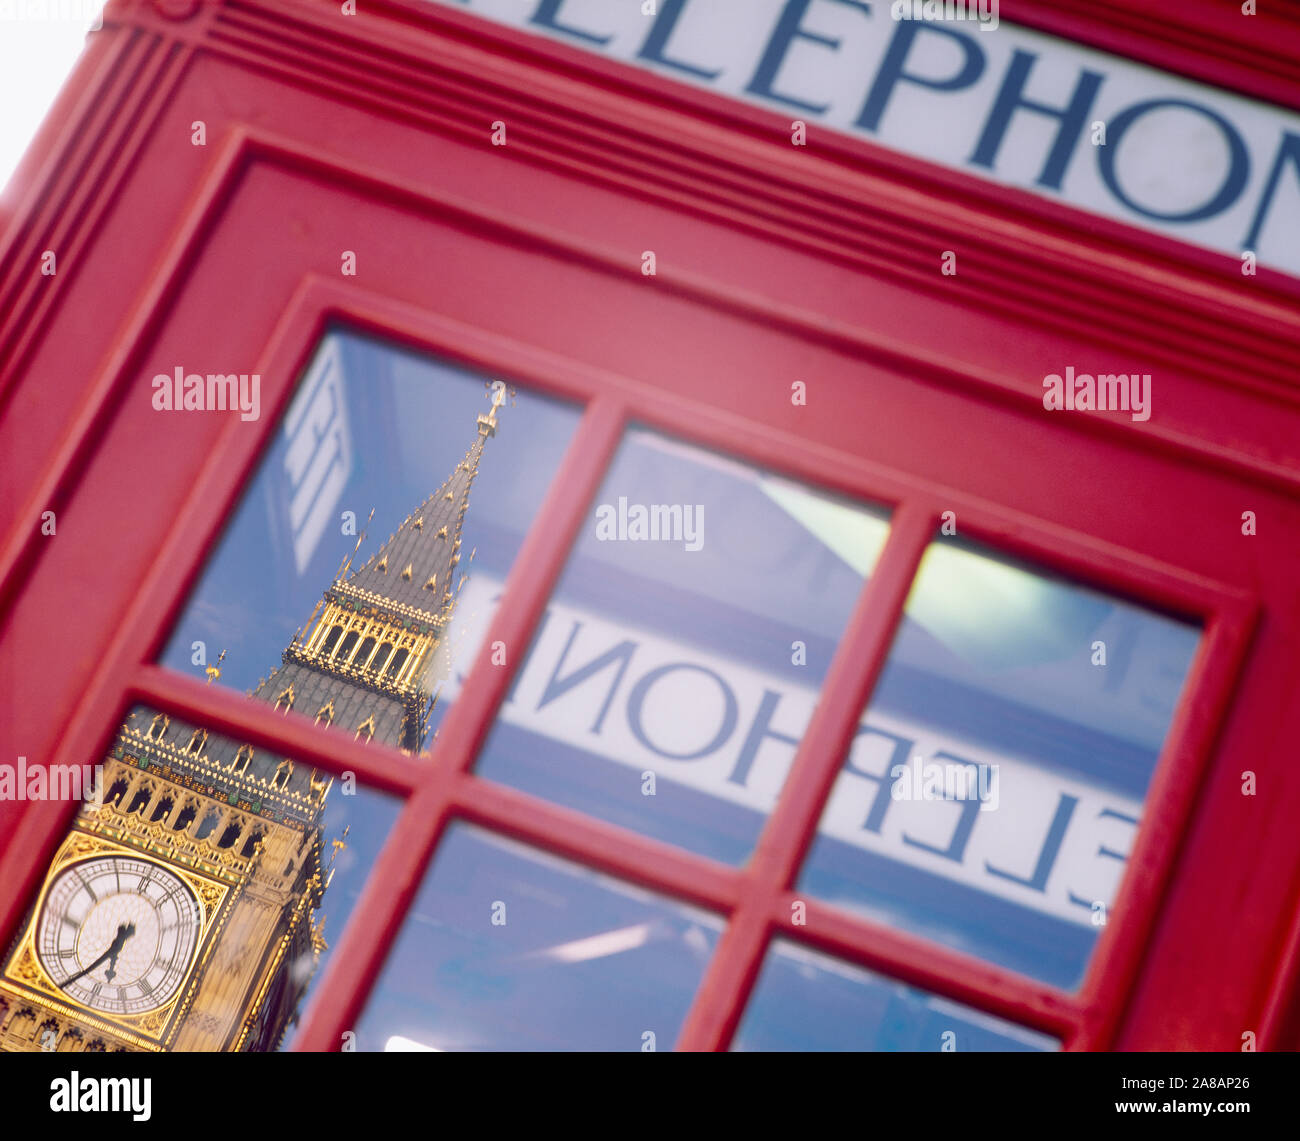 Reflection of a clock tower on the glass of a telephone booth, Big Ben, London, England Stock Photo